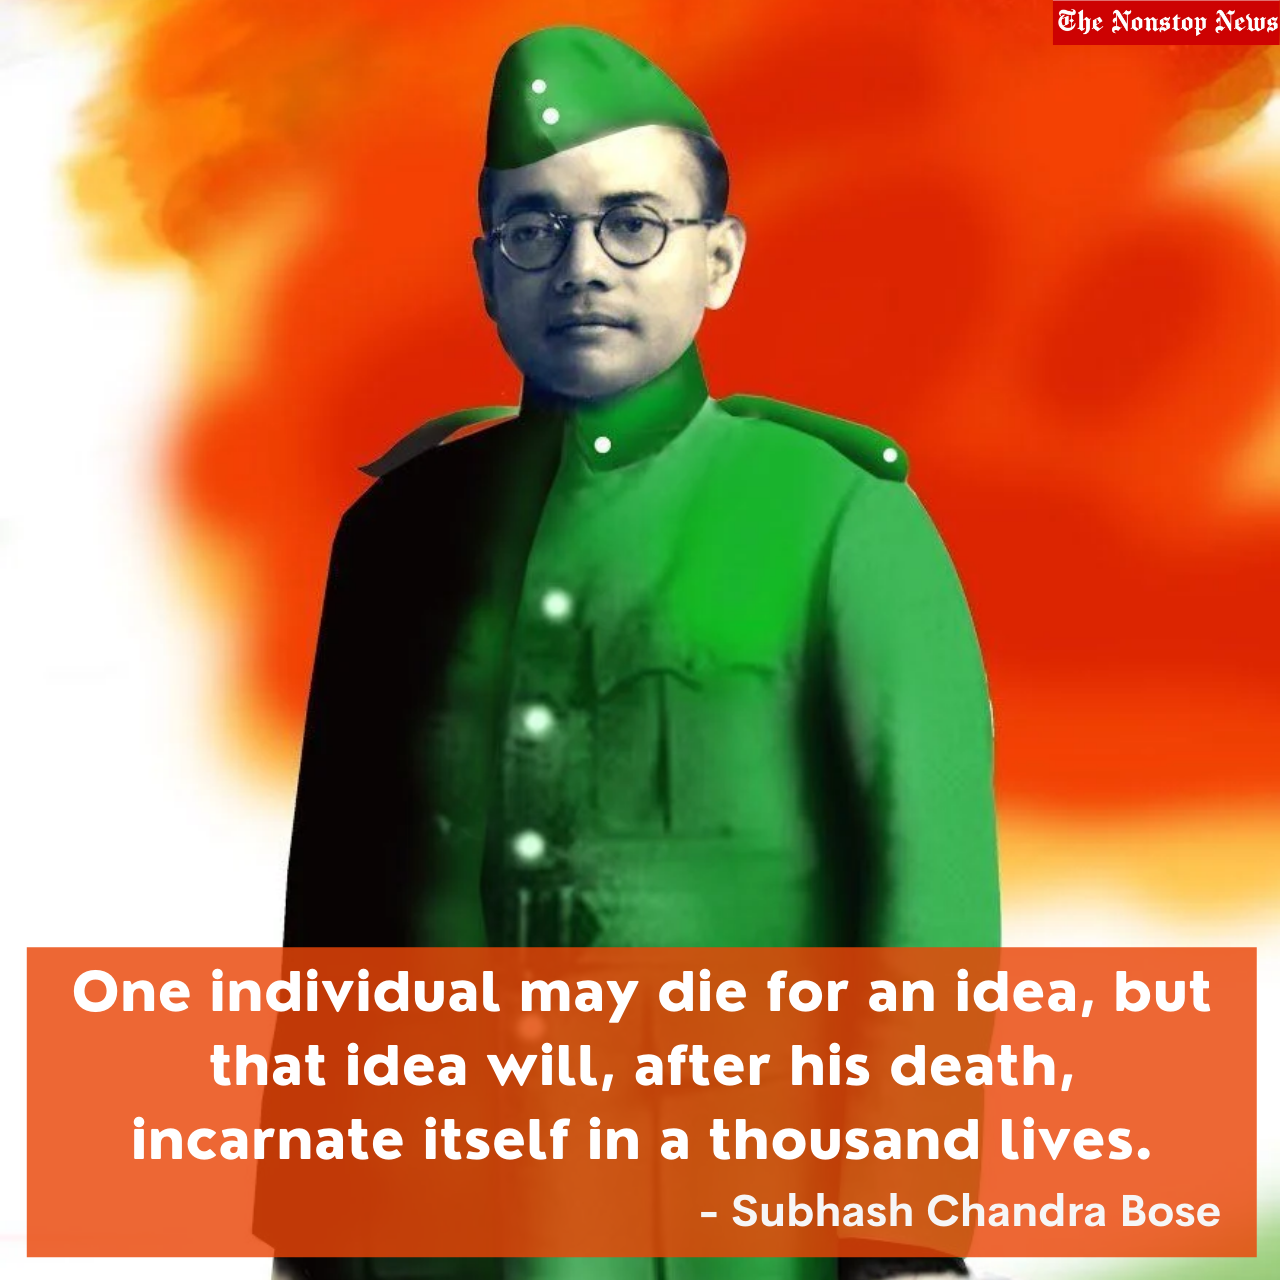 Parakram Diwas 2022: Date, Theme, History, Significance, Importance, Celebration Activities, and everything you need to know about this day also known as Netaji Jayanti